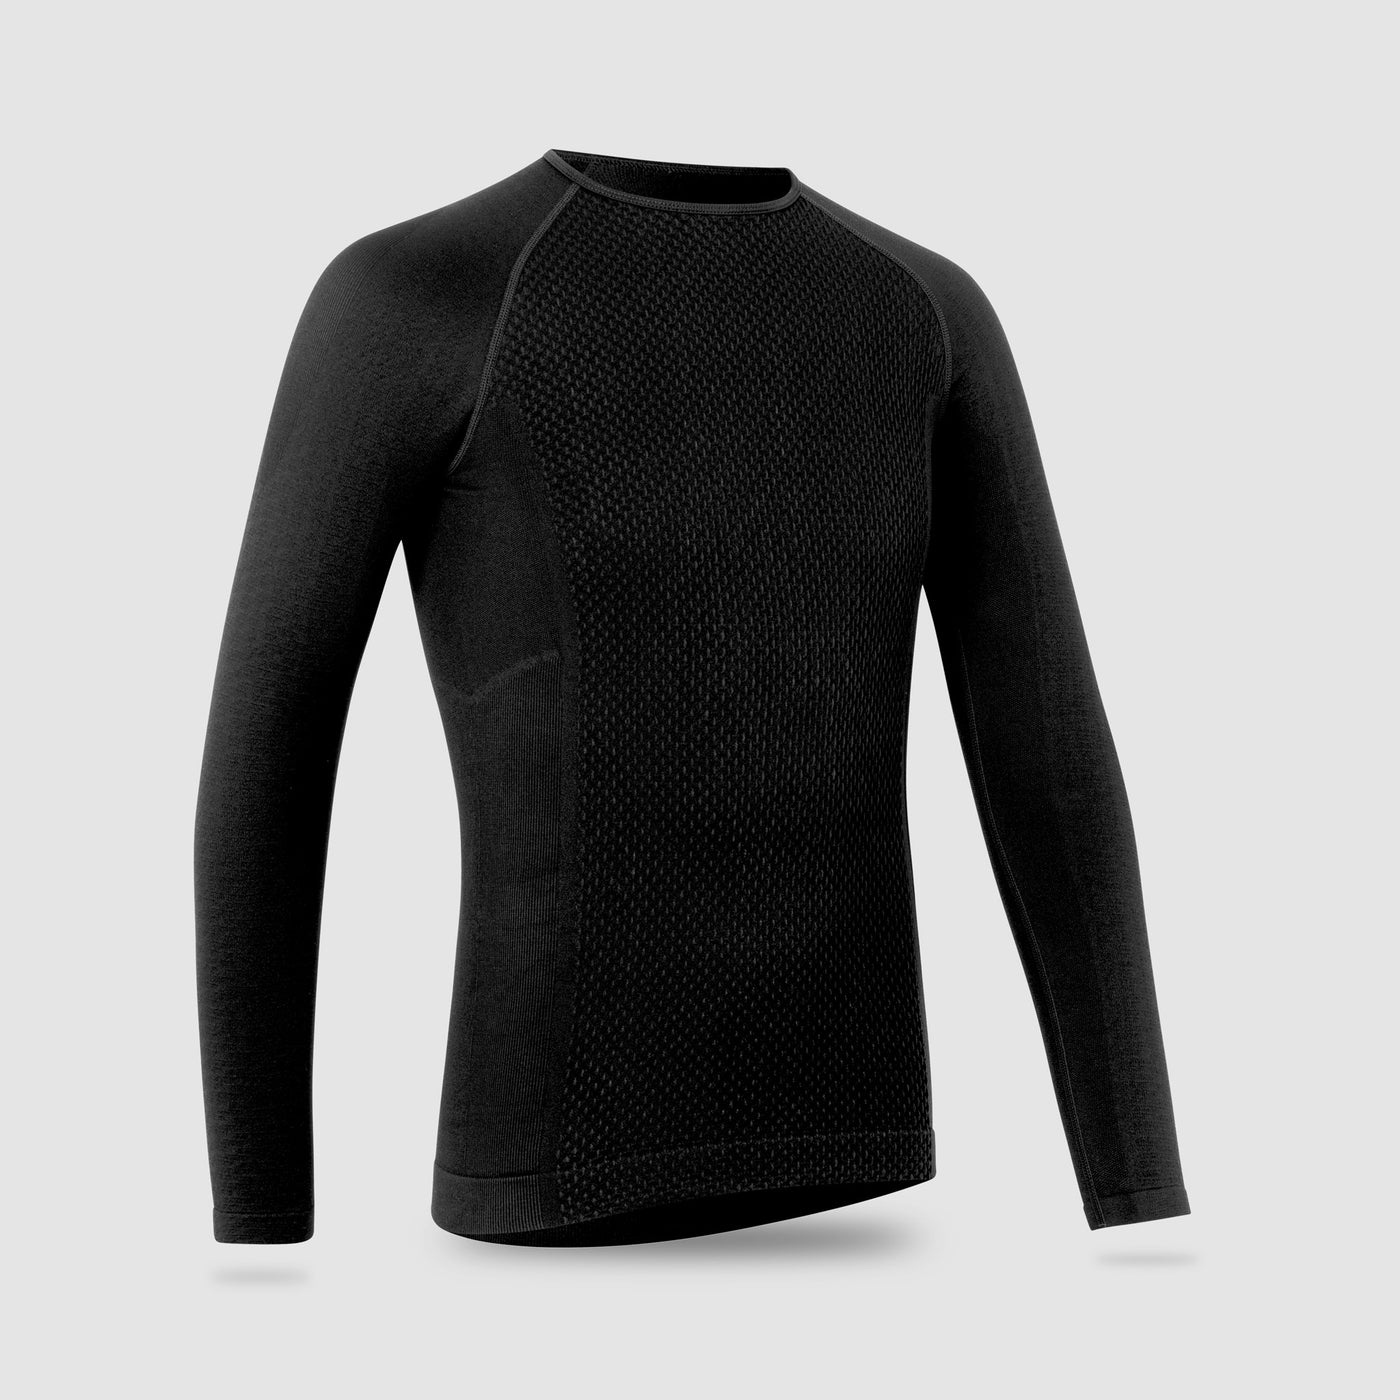 Expert 2 Thermal Seamless Long Sleeve Base Layer